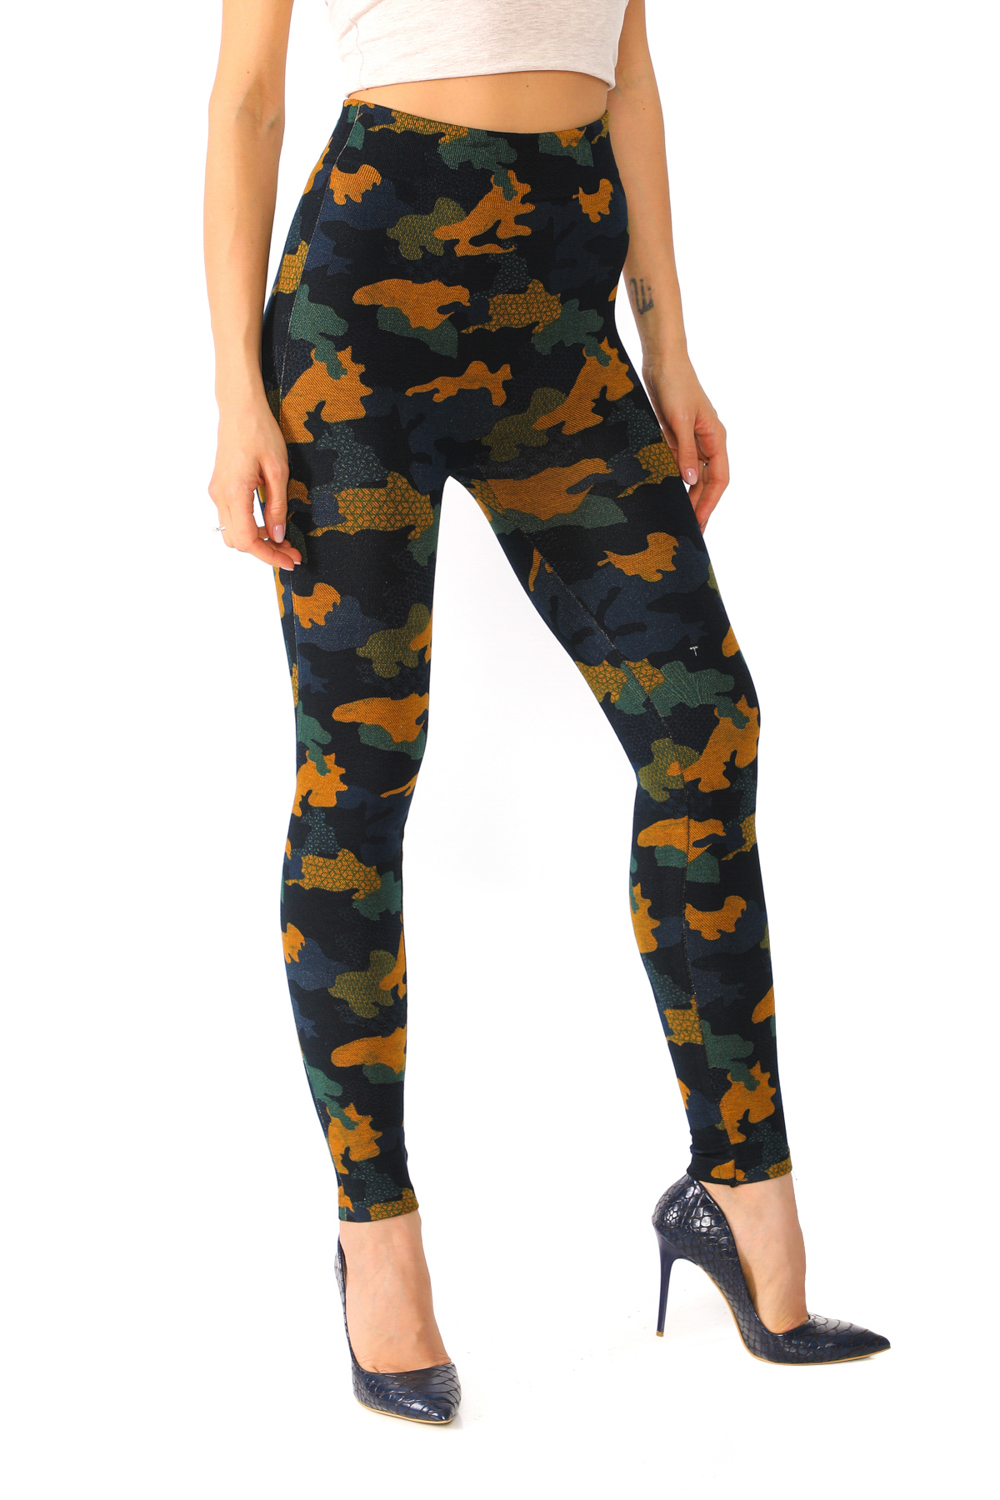 Denim Leggings with Orange and Green Camouflage Pattern - Its All Leggings